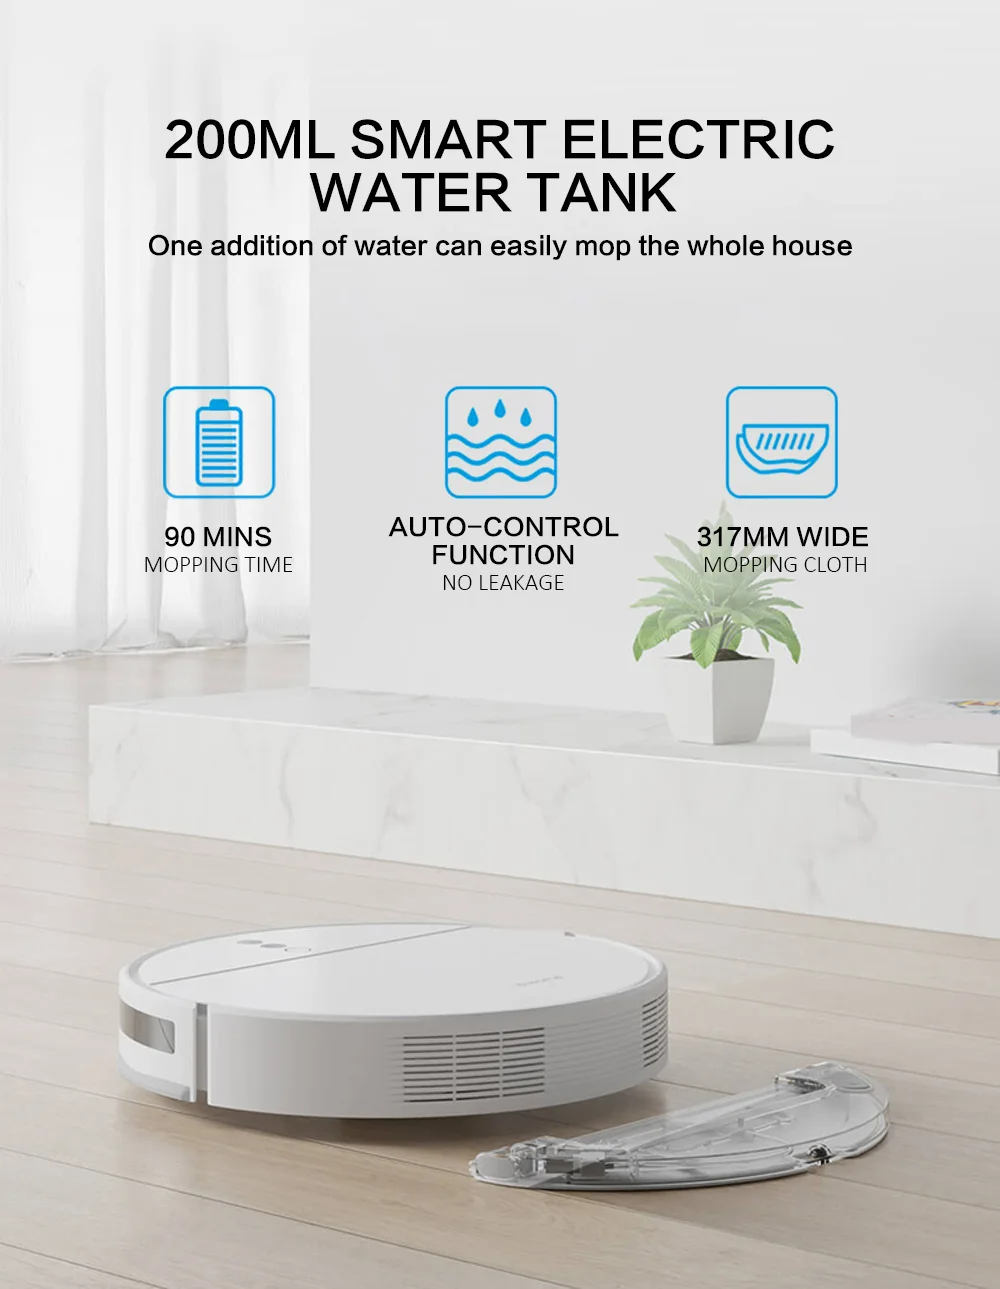 Dreame F9 Smart Robot Vacuum Cleaner 2500Pa Suction Vision Navigation Wet Dry Mop Quiet Sweeping 150-min Auto-cleaning